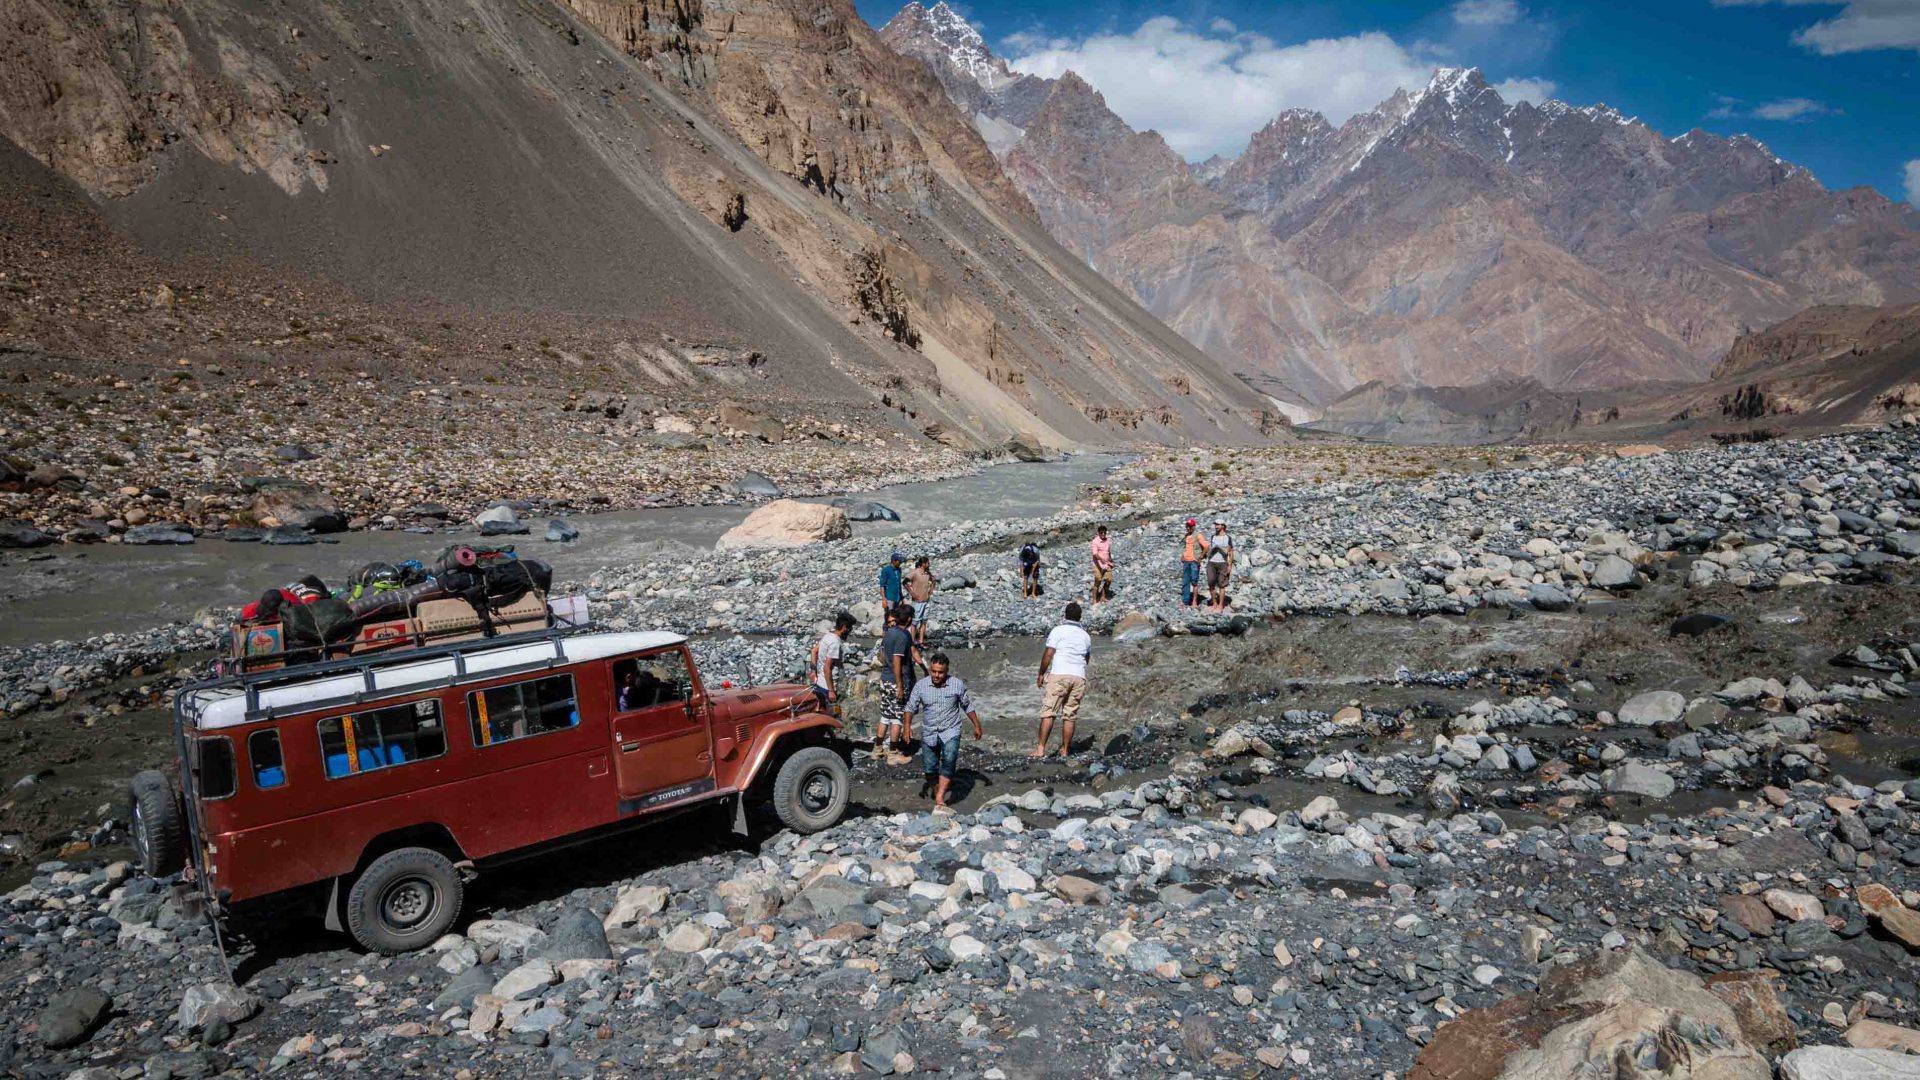 River crossings, bumpy tracks and steep cliffs were all par for the course en route to Shimshal from Islamabad.